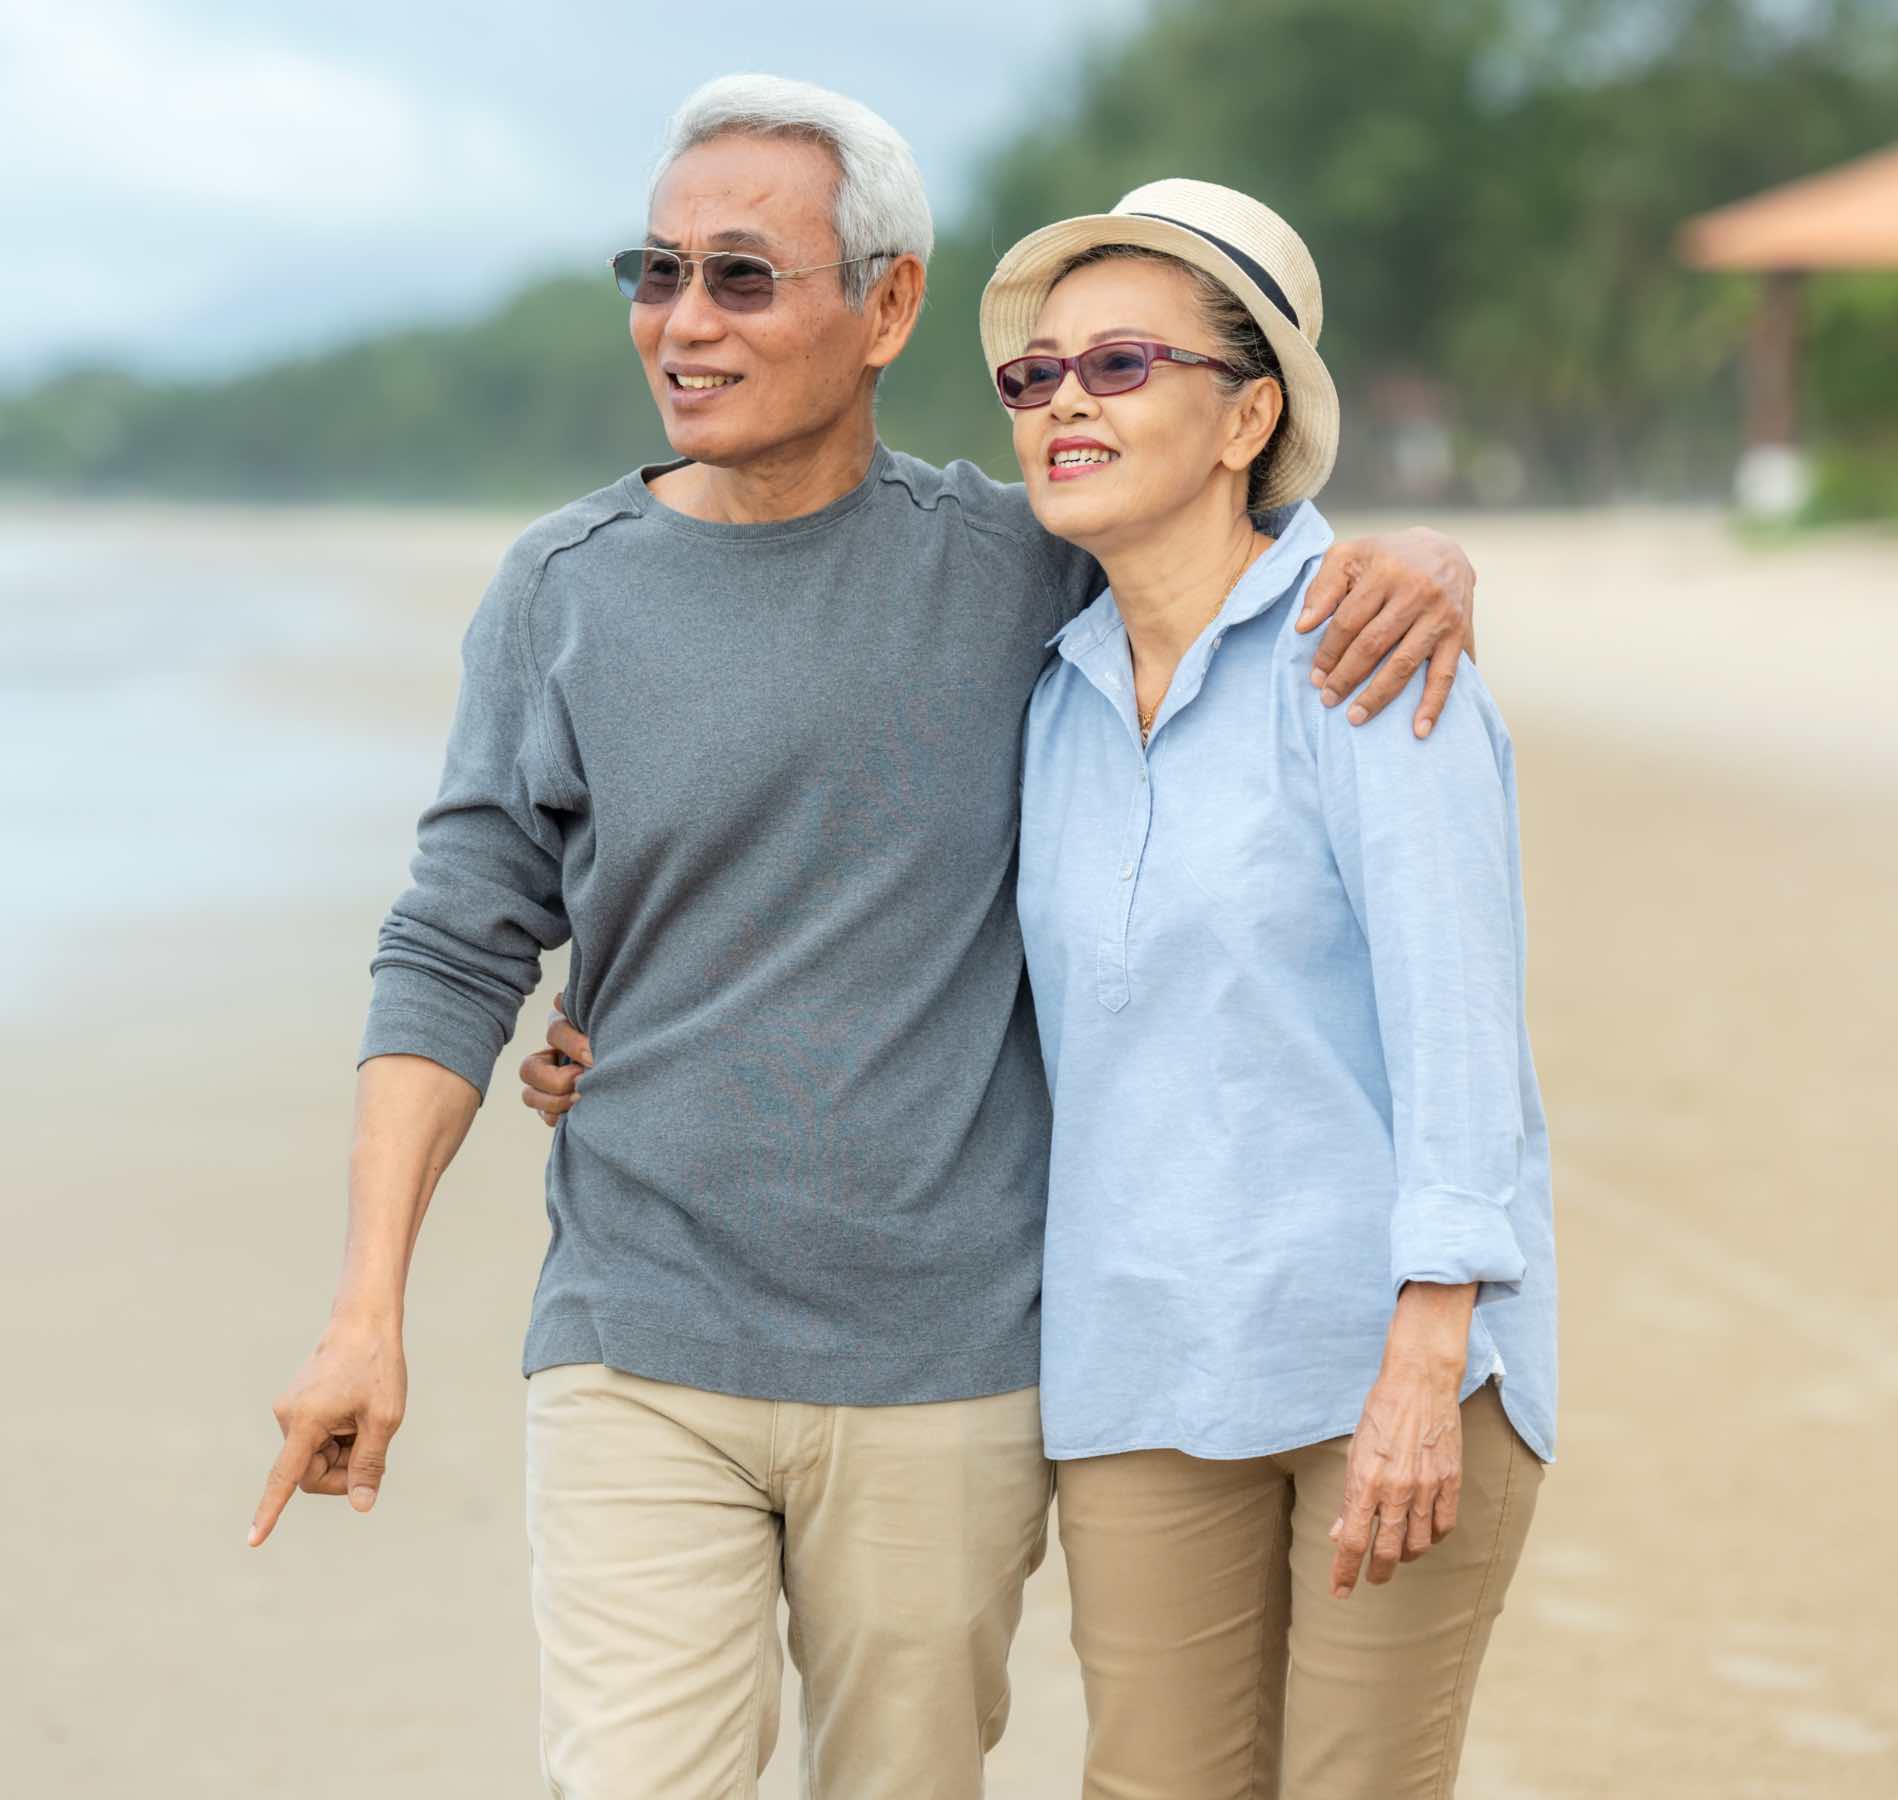 Couple walking on the beach - alternative methods of neck pain treatment with Chronic Care of Richmond could greatly improve your quality of life.